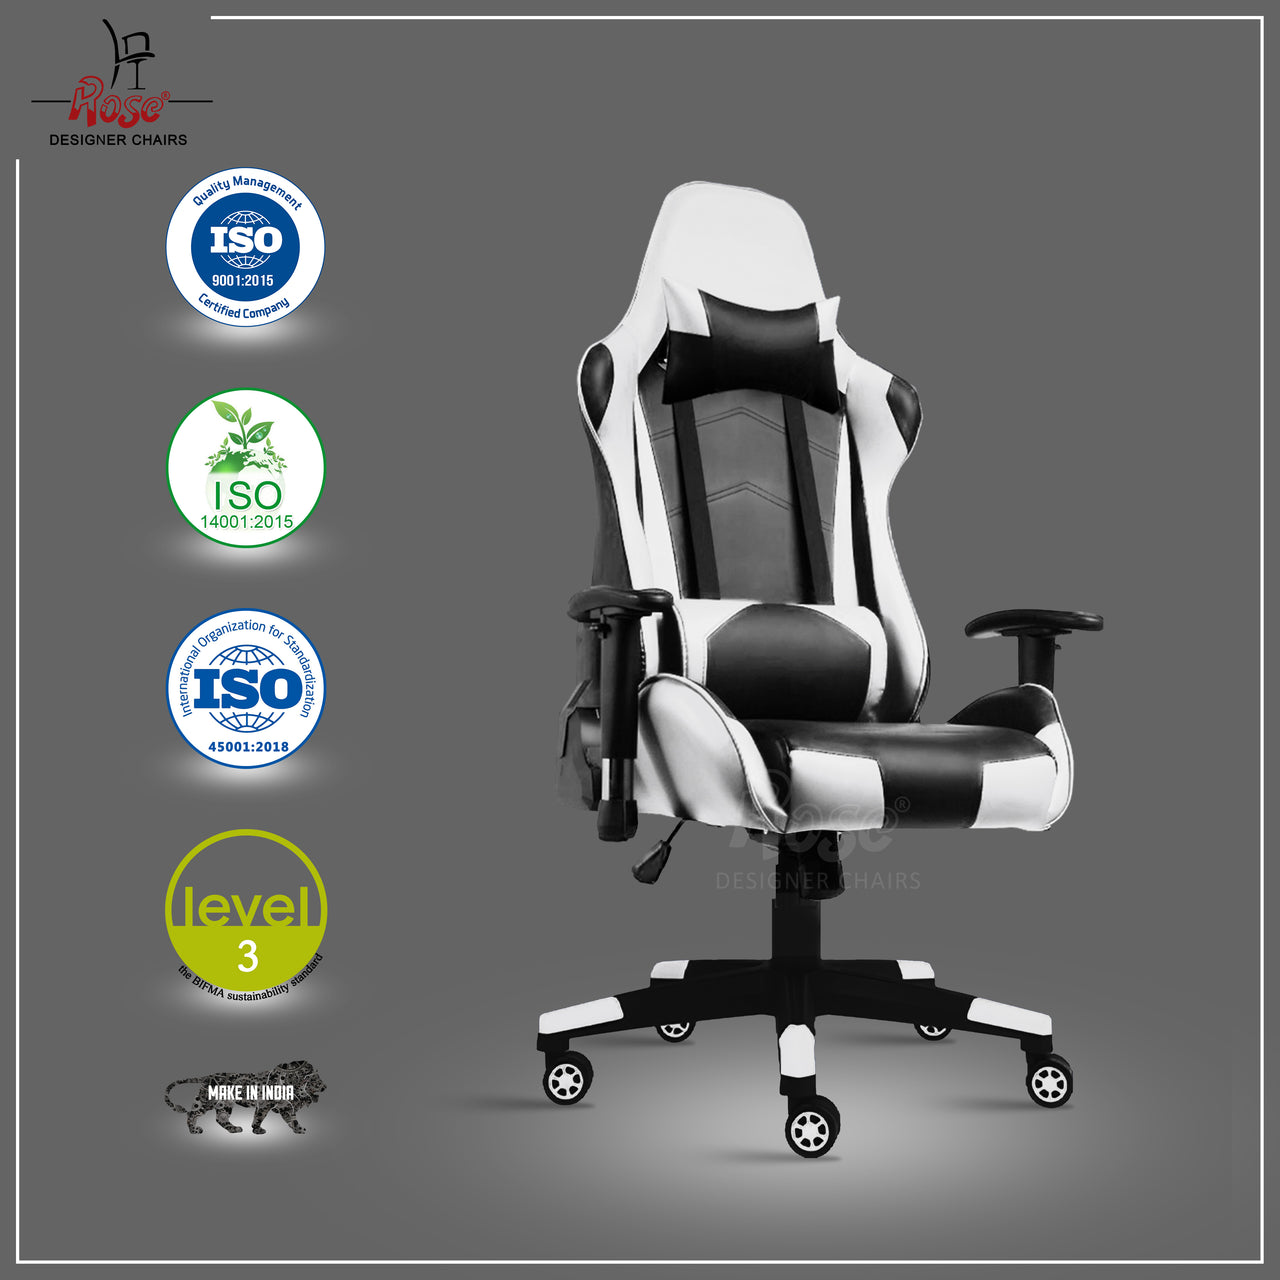 Up Gamer Multi-Functional Footrest Ergonomic Gaming Chair with Lumbar Support | Adjustable Back Rest | Fixed Arm Rest | Office/Work from Home | Ergonomic High Back Chair (White & Black)